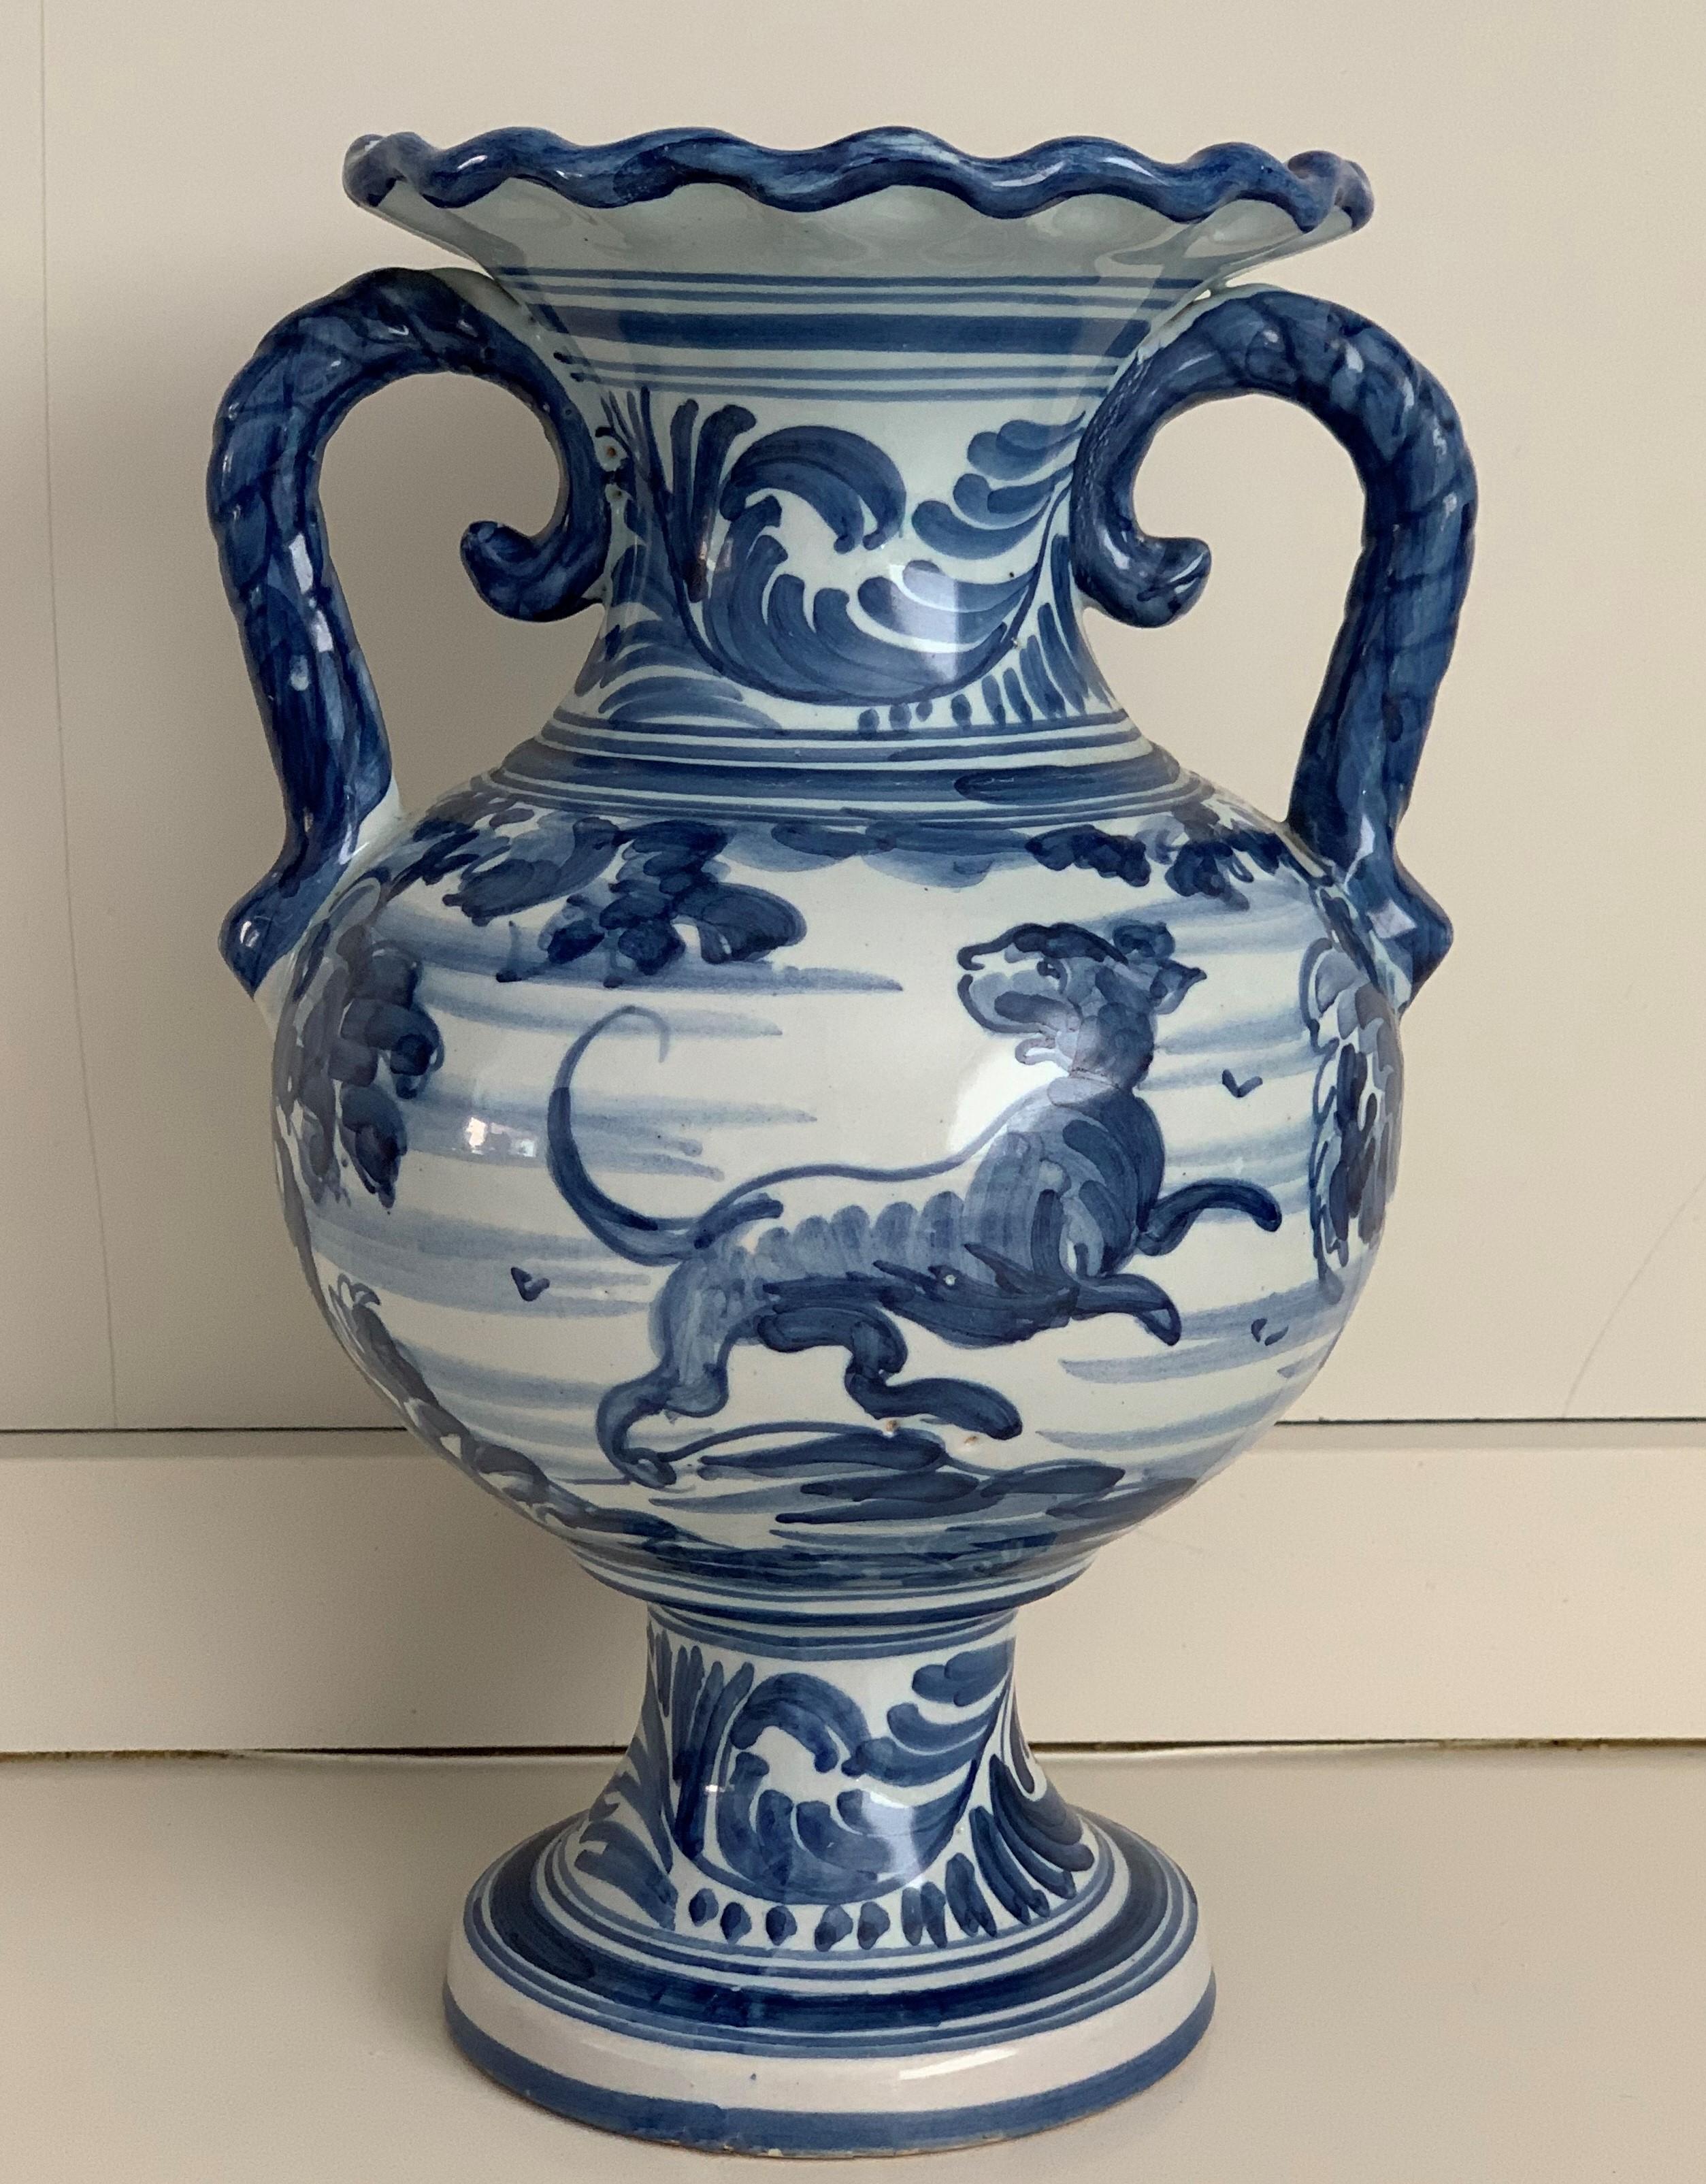 A striking Spanish glazed earthenware two-handled blue and white painted urn with handles, the body underglaze blue and white decorated very tipycal of this region.

Talavera de la Reina pottery is a craft made in Talavera de la Reina, Toledo